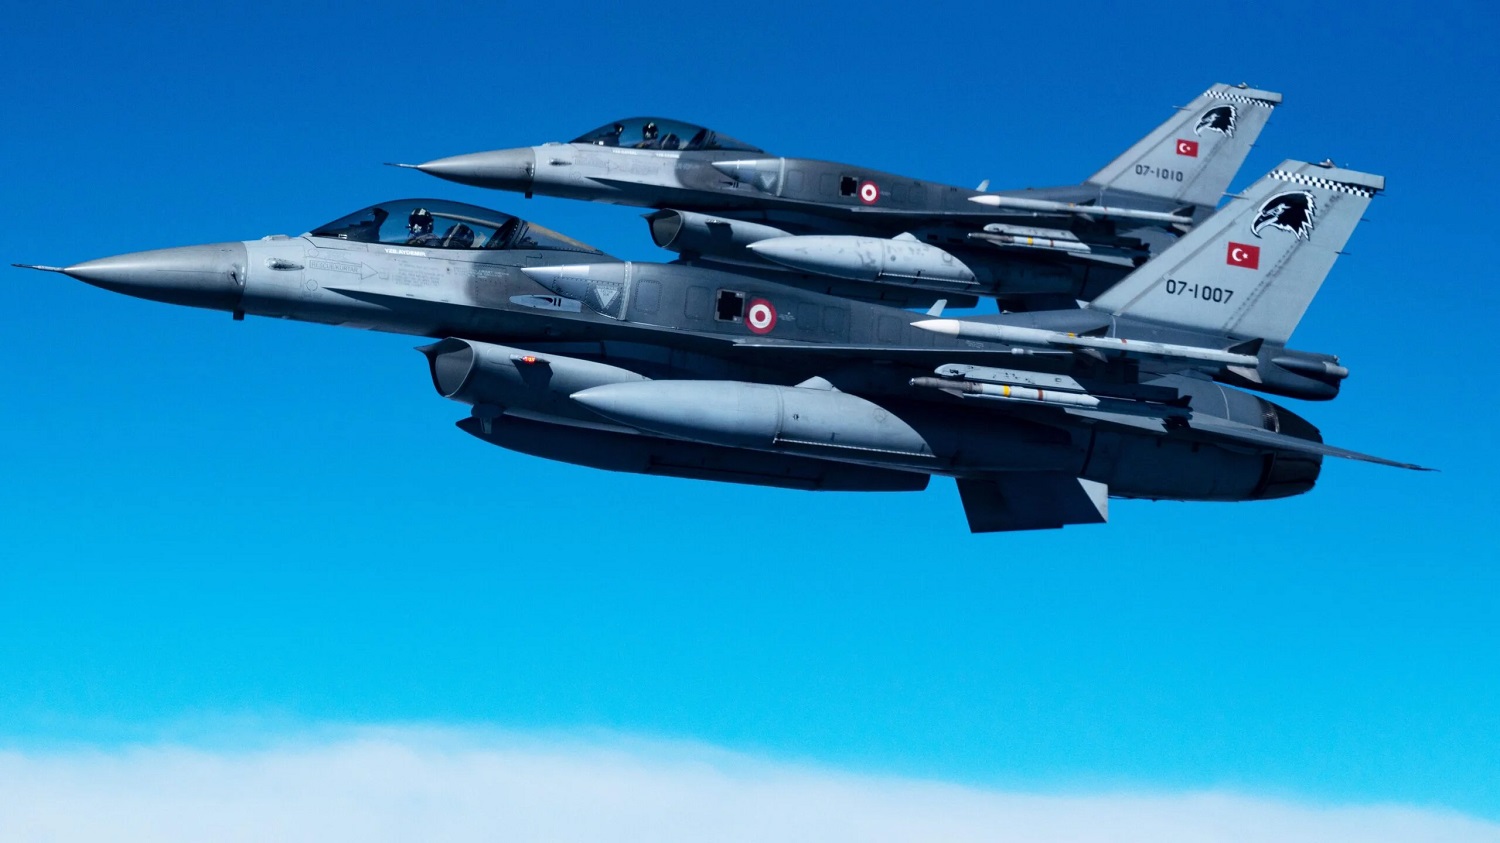 Atmaca Anti-Ship Missile Integration Enhances Capabilities of Aging Turkish F-16 Fighter Jets